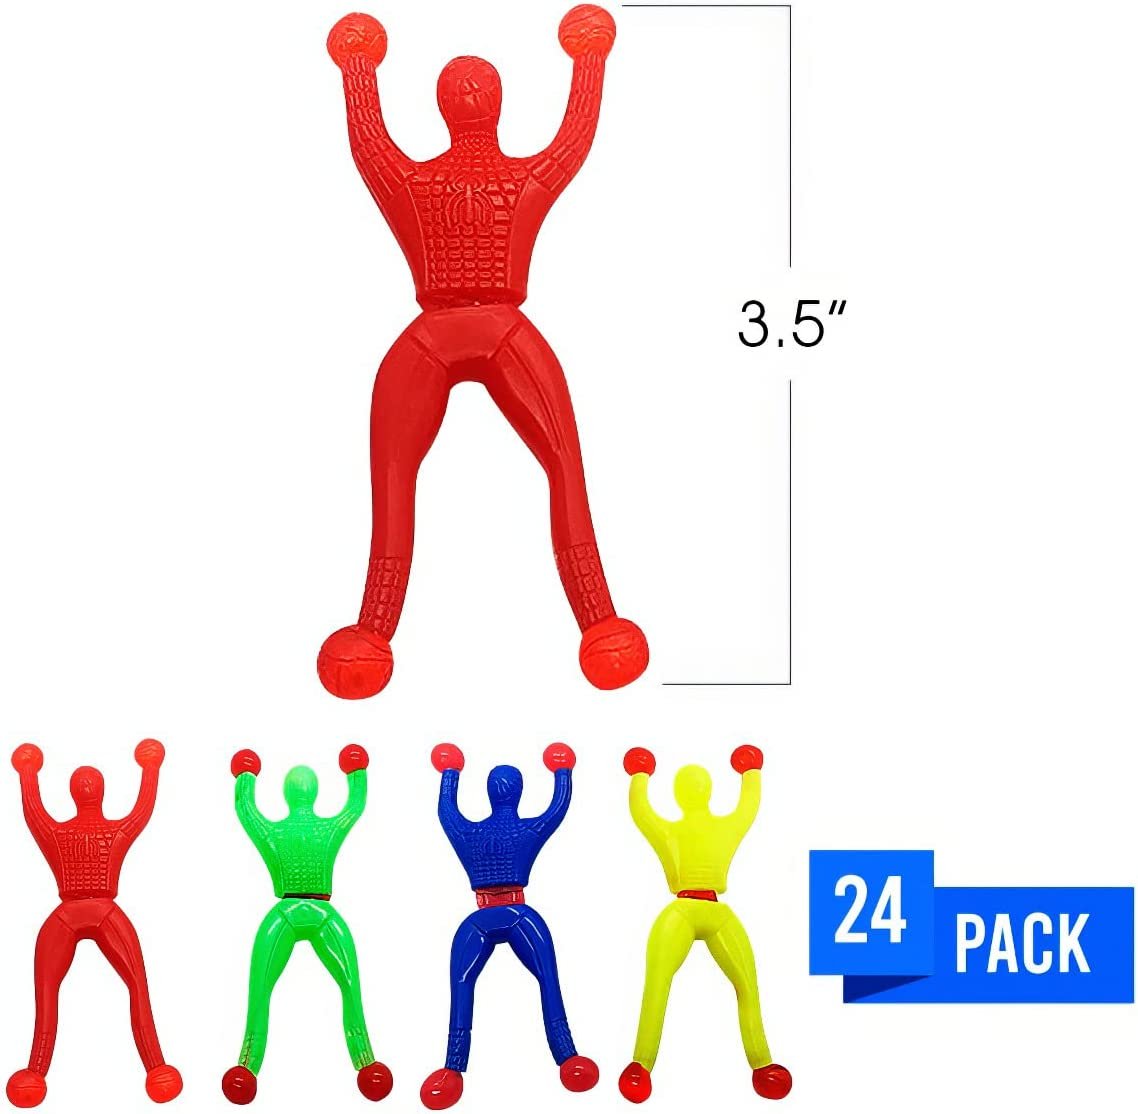 Colorful Sticky Wall Climbers - Pack of 24 - Mountain Climber Figures - Sticky, Slimy, and Rubbery Novelties - Fun Gift for Kids Ages 3+